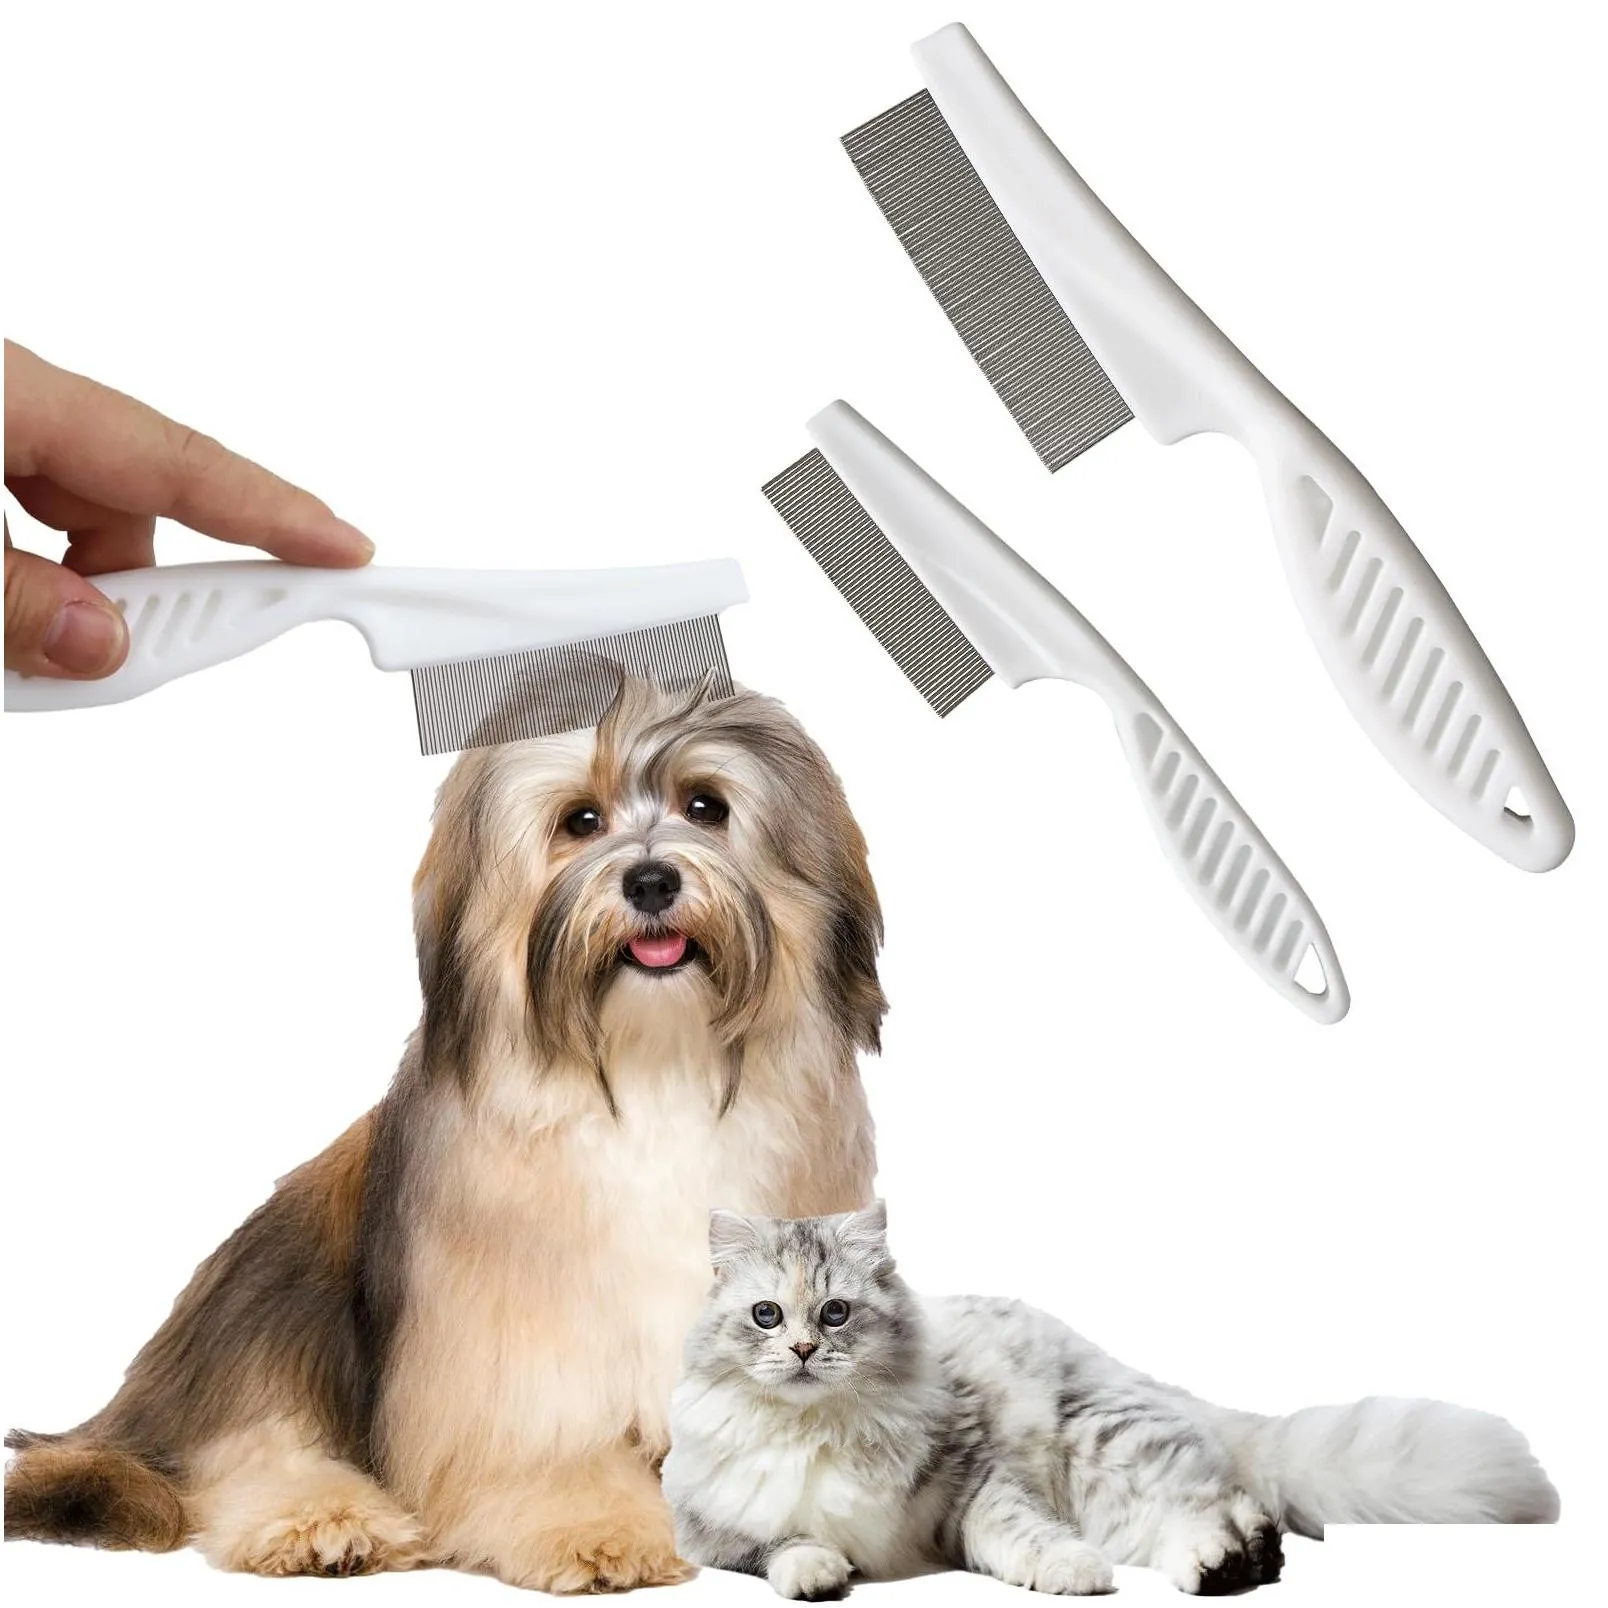 Dog Grooming Mtifunctional Lice Comb Pet Hair Tear Stain Removal Flea Brush For Cats 2 In 1 Teeth Stainless Steel Combing Mas Double-S Dh4Zj